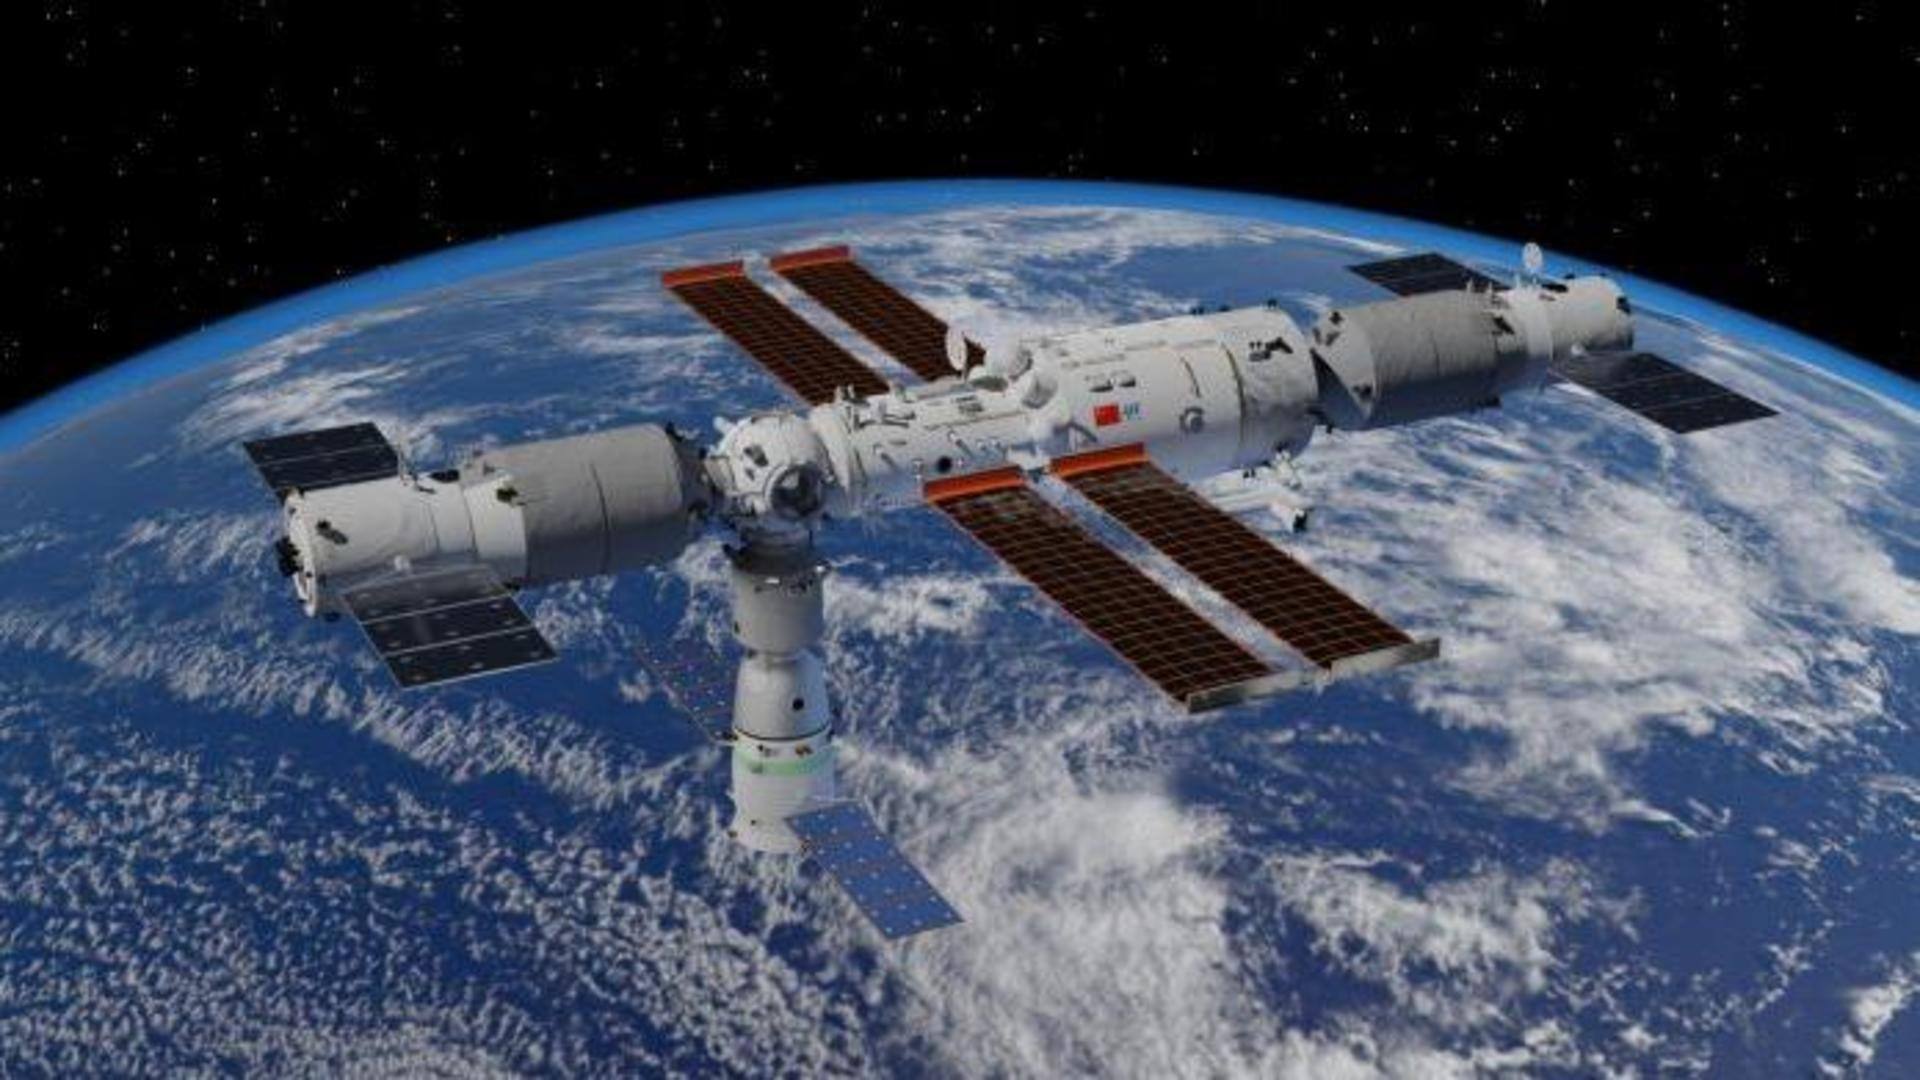 China will send 2 crewed missions to Tiangong this year